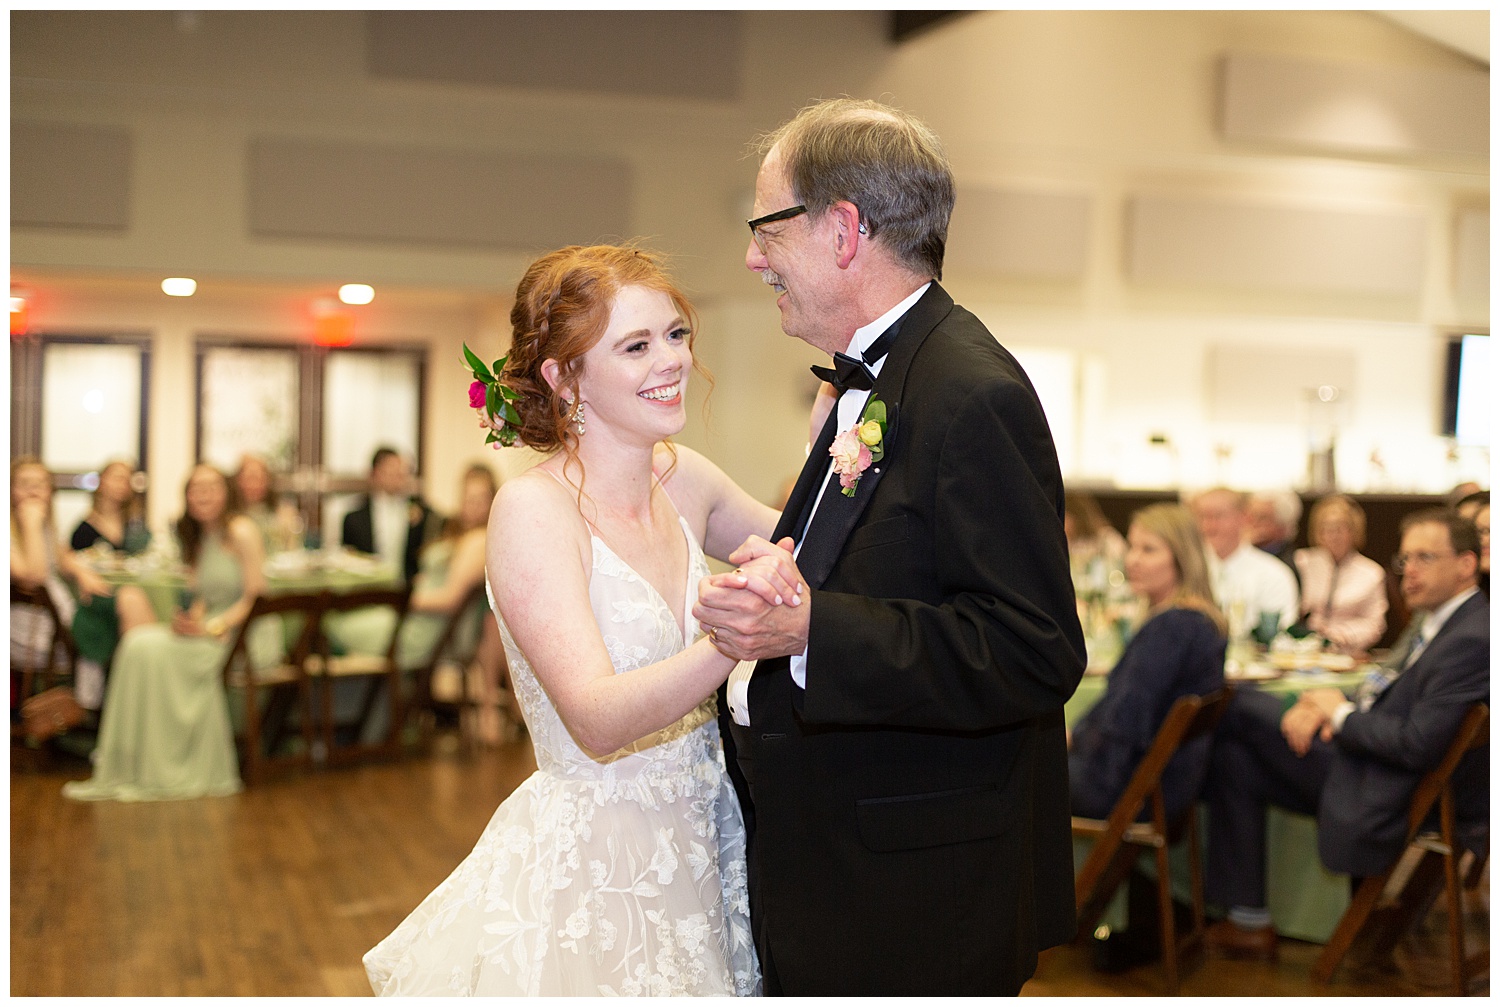 Bride sharing a first dance with her father after her rainy spring wedding.